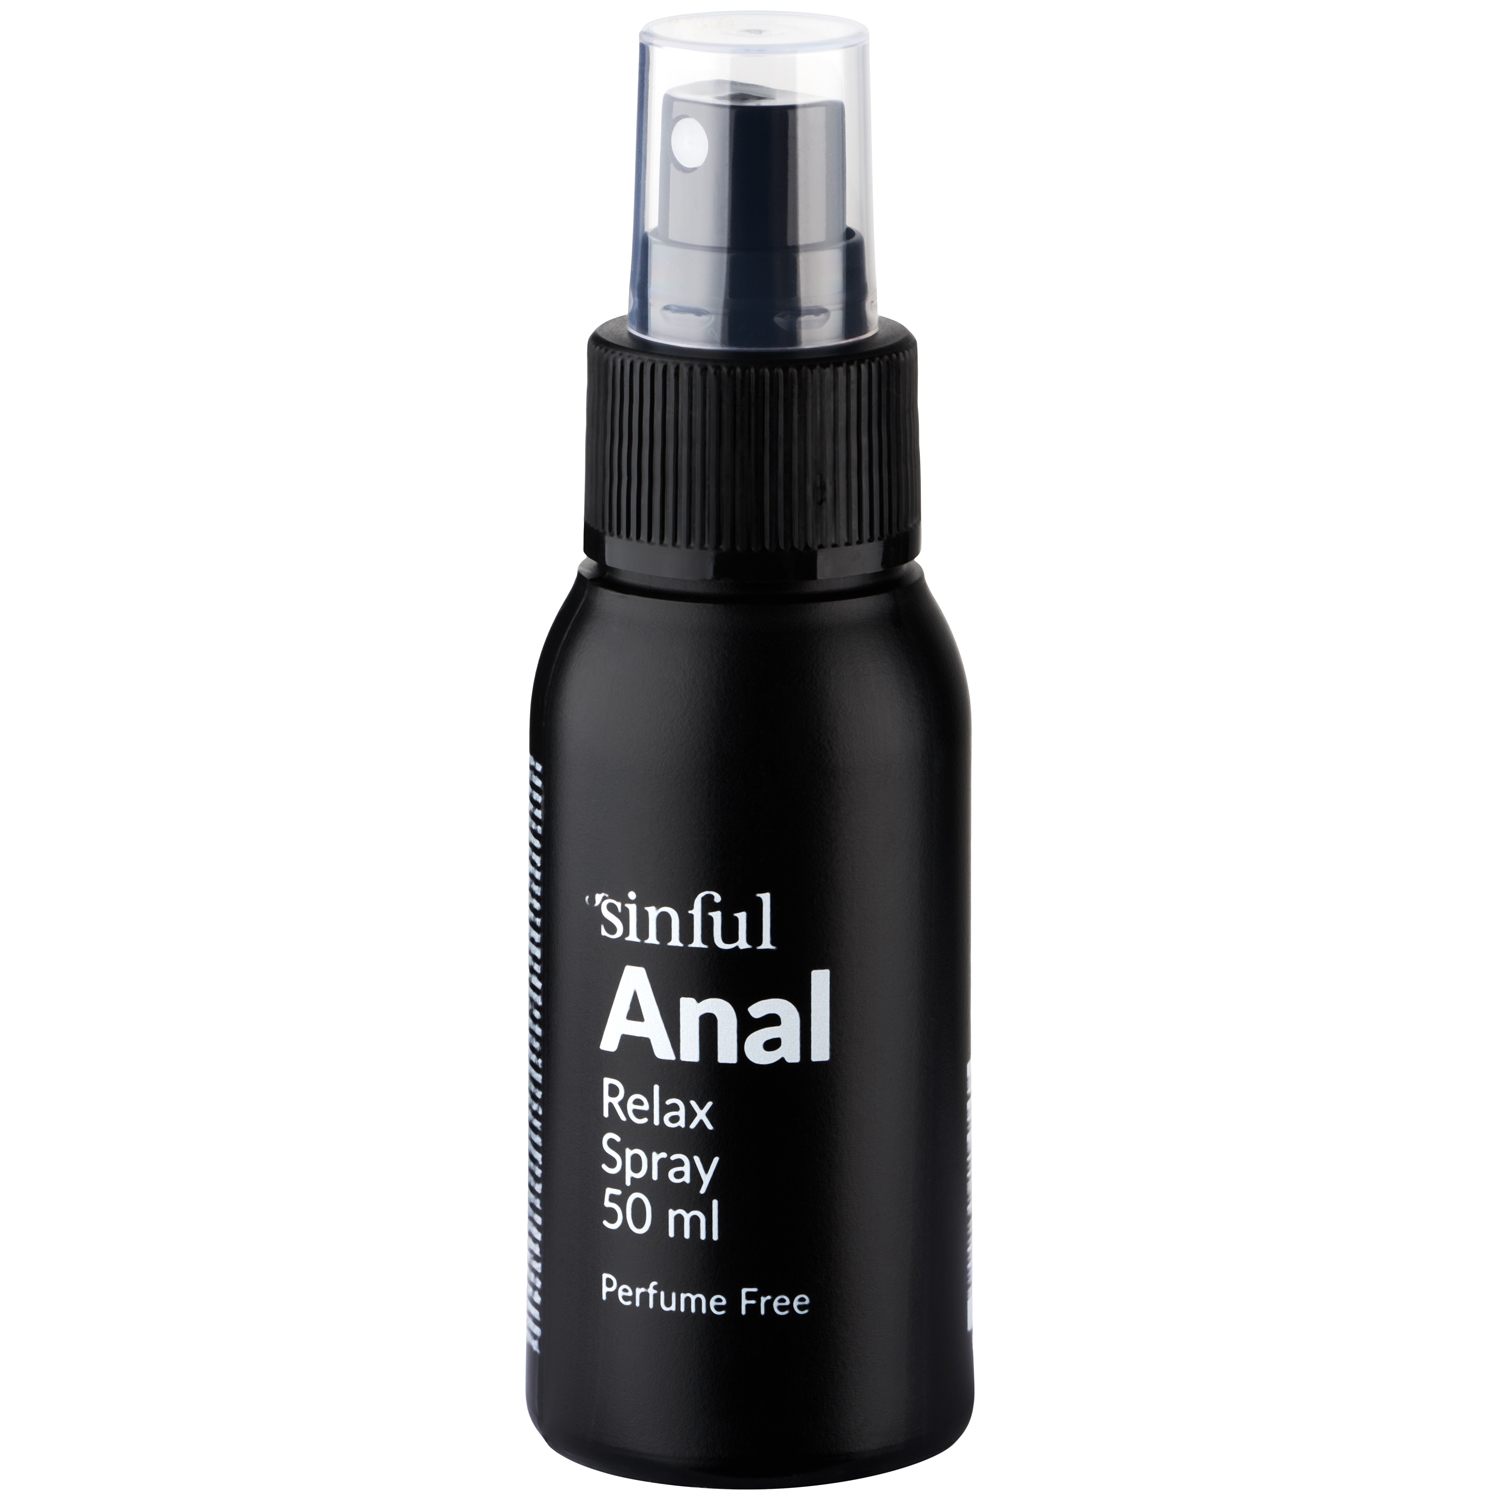 Sinful Sinful Anal Relax Spray 50 ml